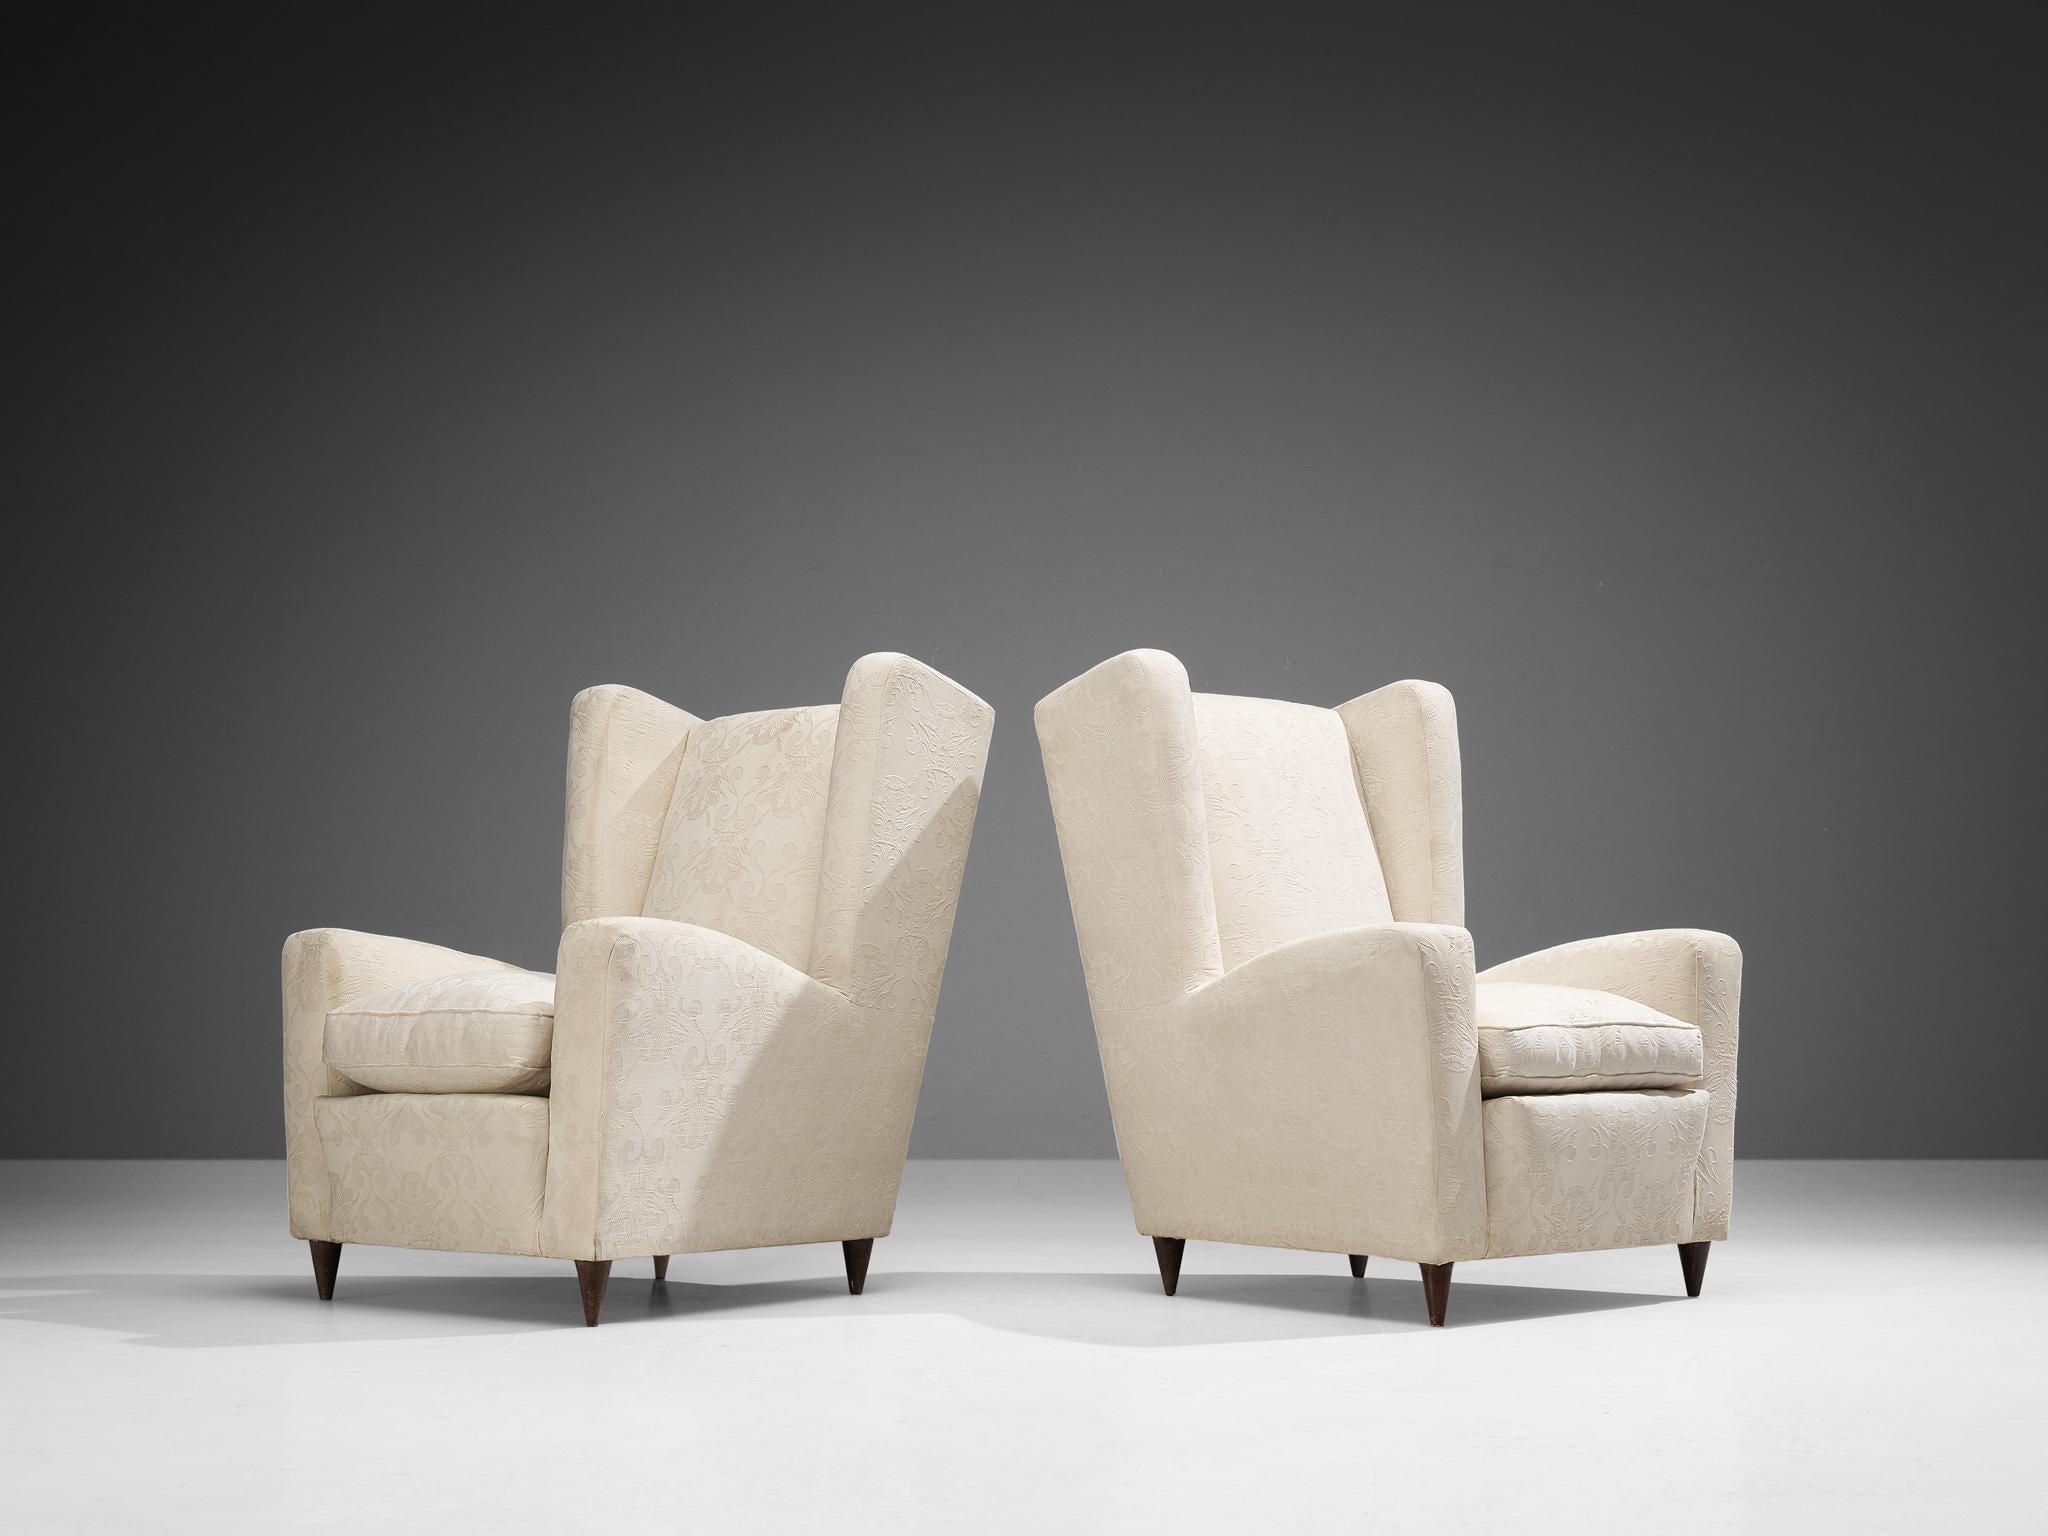 Pair of lounge chairs, fabric, wood, Italy, 1950s.

This Classic Italian Postwar wingback chair has an unusually high back and gracious wings that contain dramatized pointed corners. The armrests feature the same pronounced curves that give the